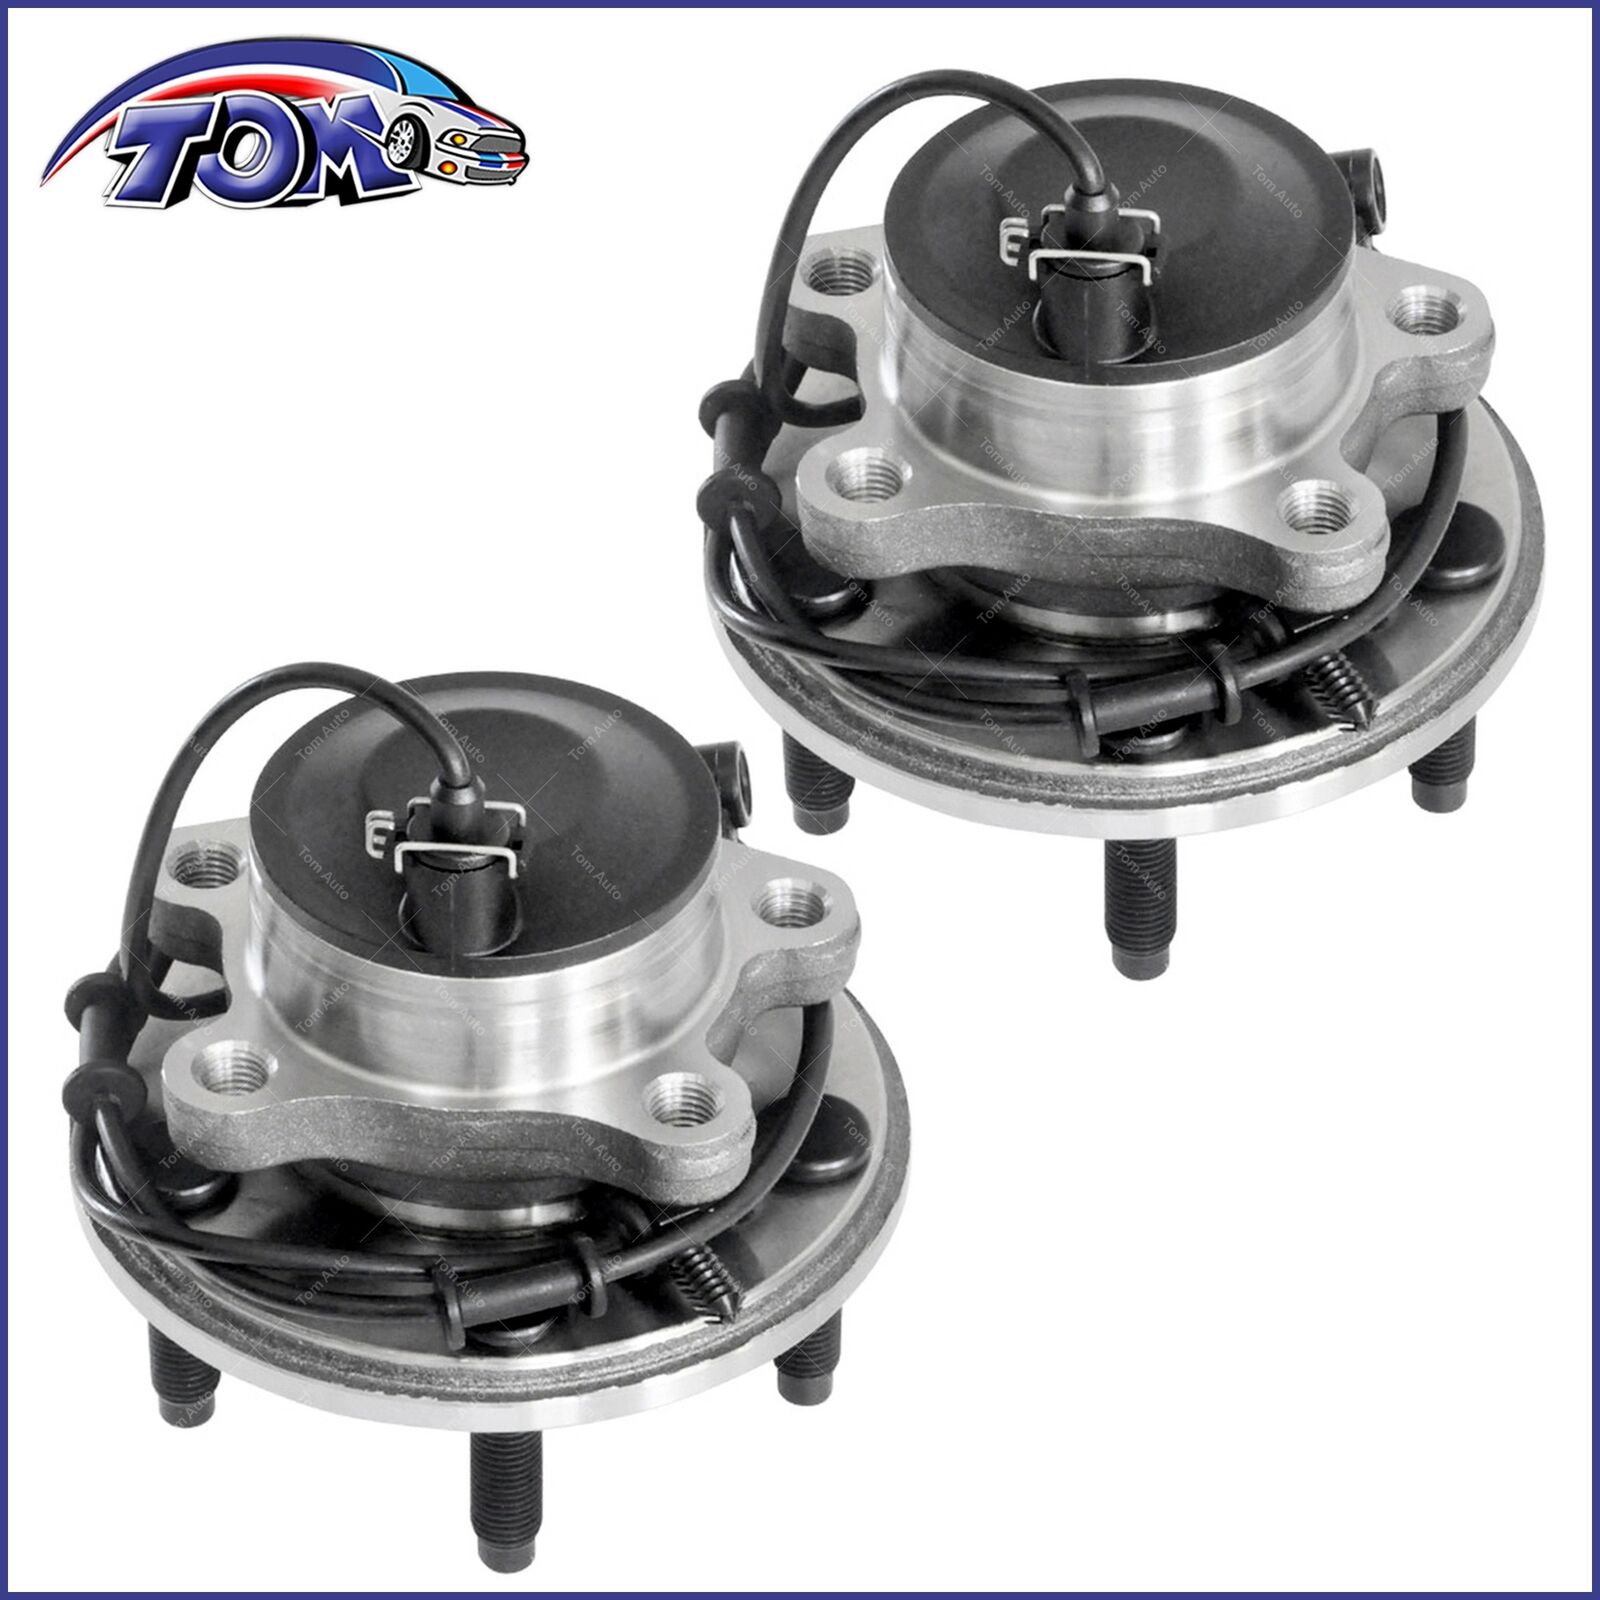 2pcs NEW Front Wheel Hub and Bearing 2WD w/ ABS for JAGUAR S-TYPE XF XJR XJ8